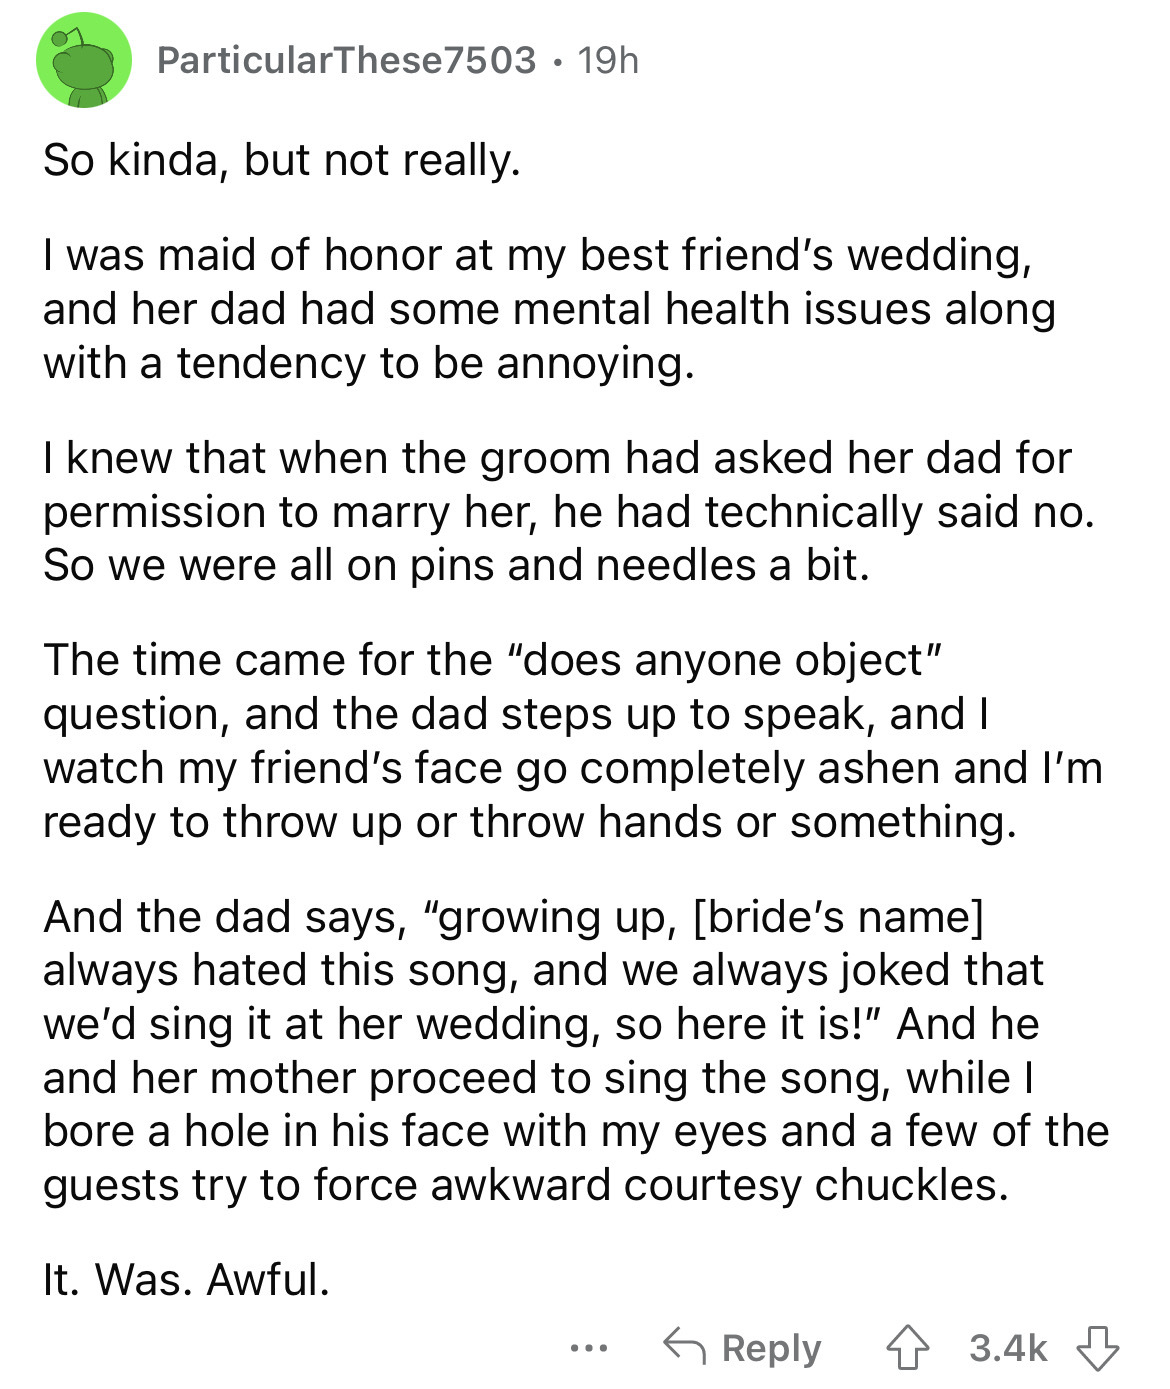 document - ParticularThese 7503 19h So kinda, but not really. I was maid of honor at my best friend's wedding, and her dad had some mental health issues along with a tendency to be annoying. I knew that when the groom had asked her dad for permission to m